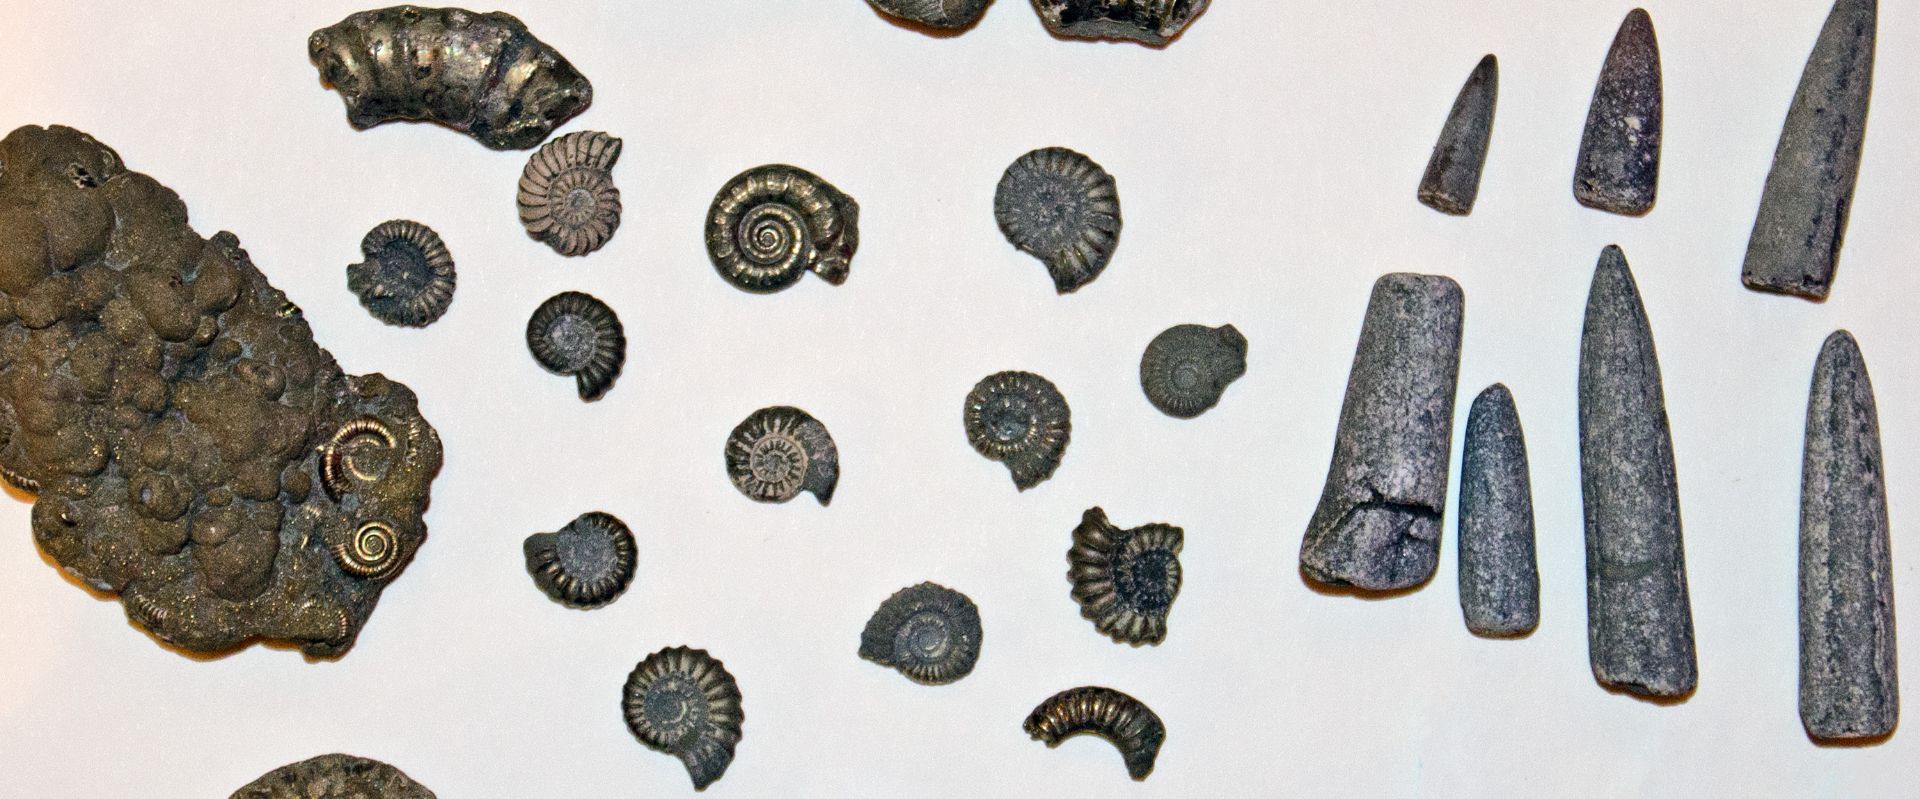 Fossils found on Charmouth Beach